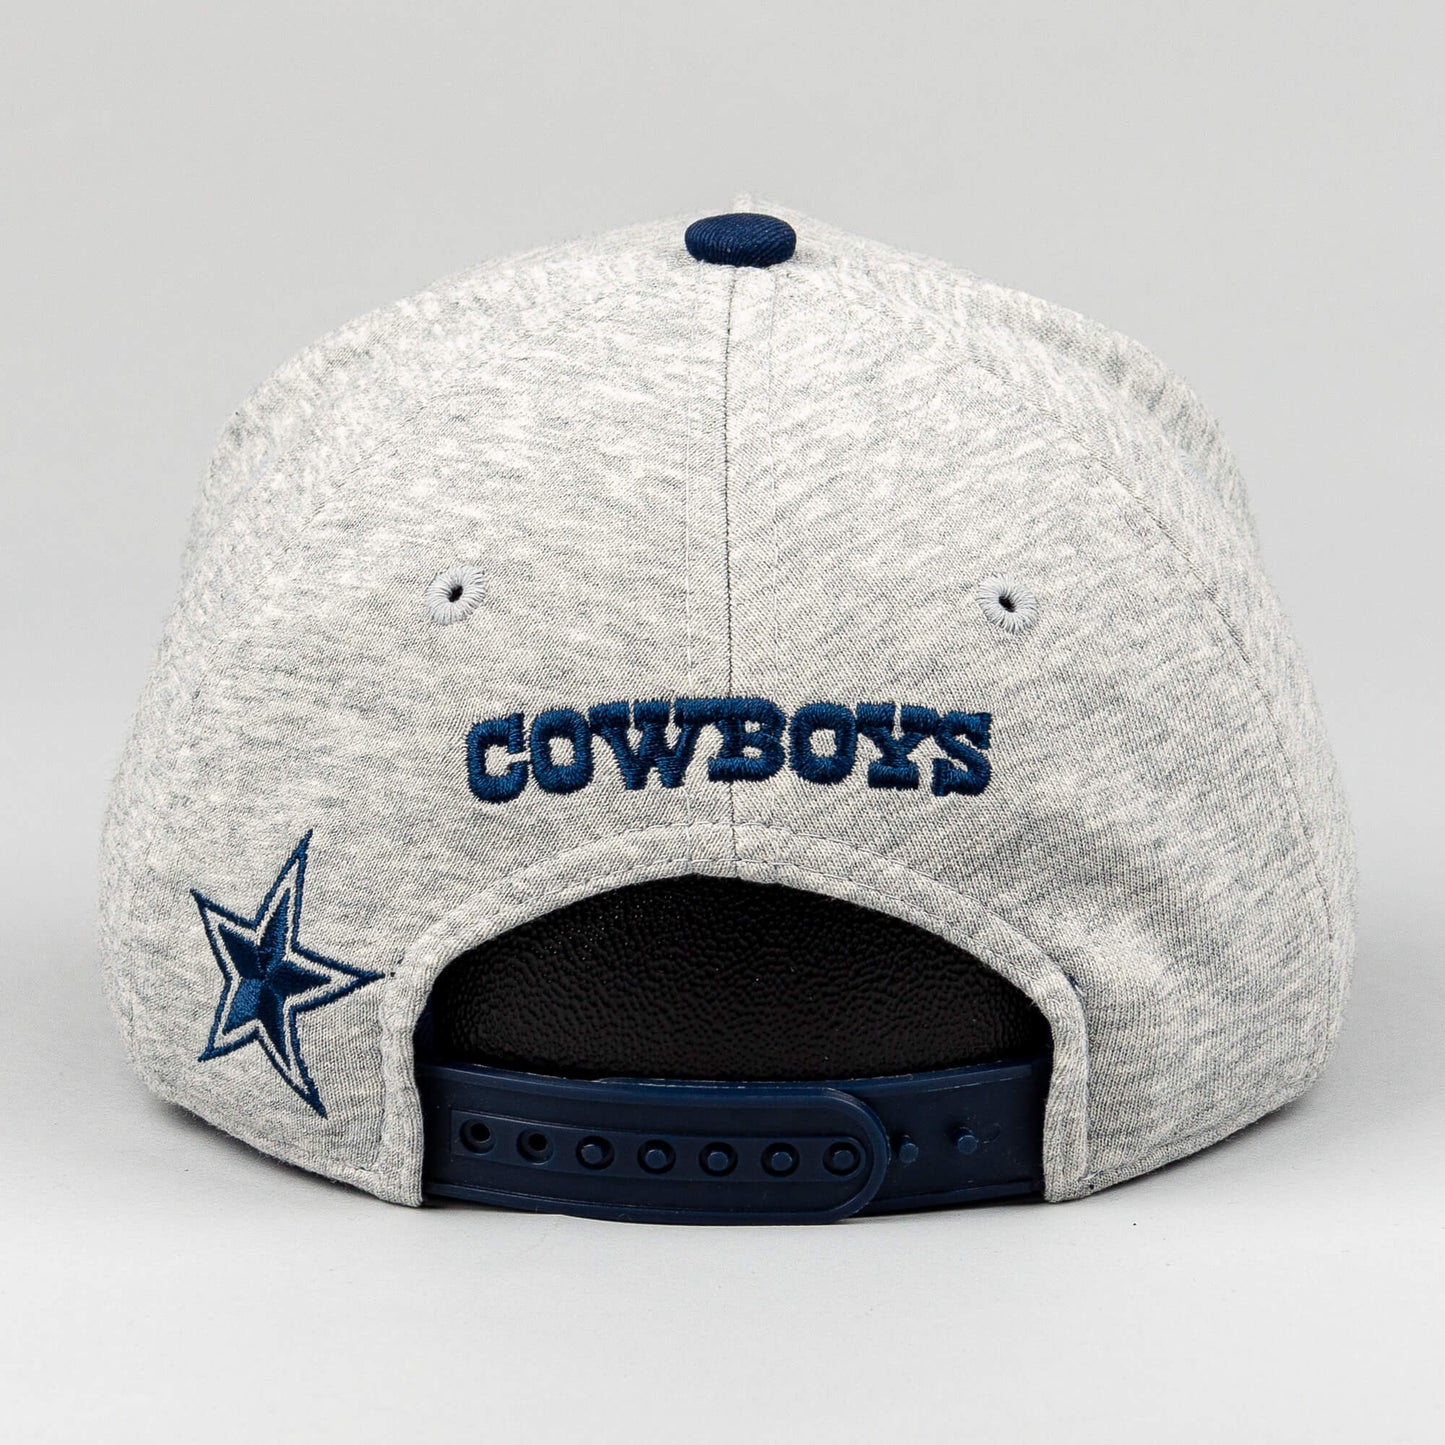 Outer Stuff Nfl Life Style Graphic Snap Back Dallas Cowboys Grey